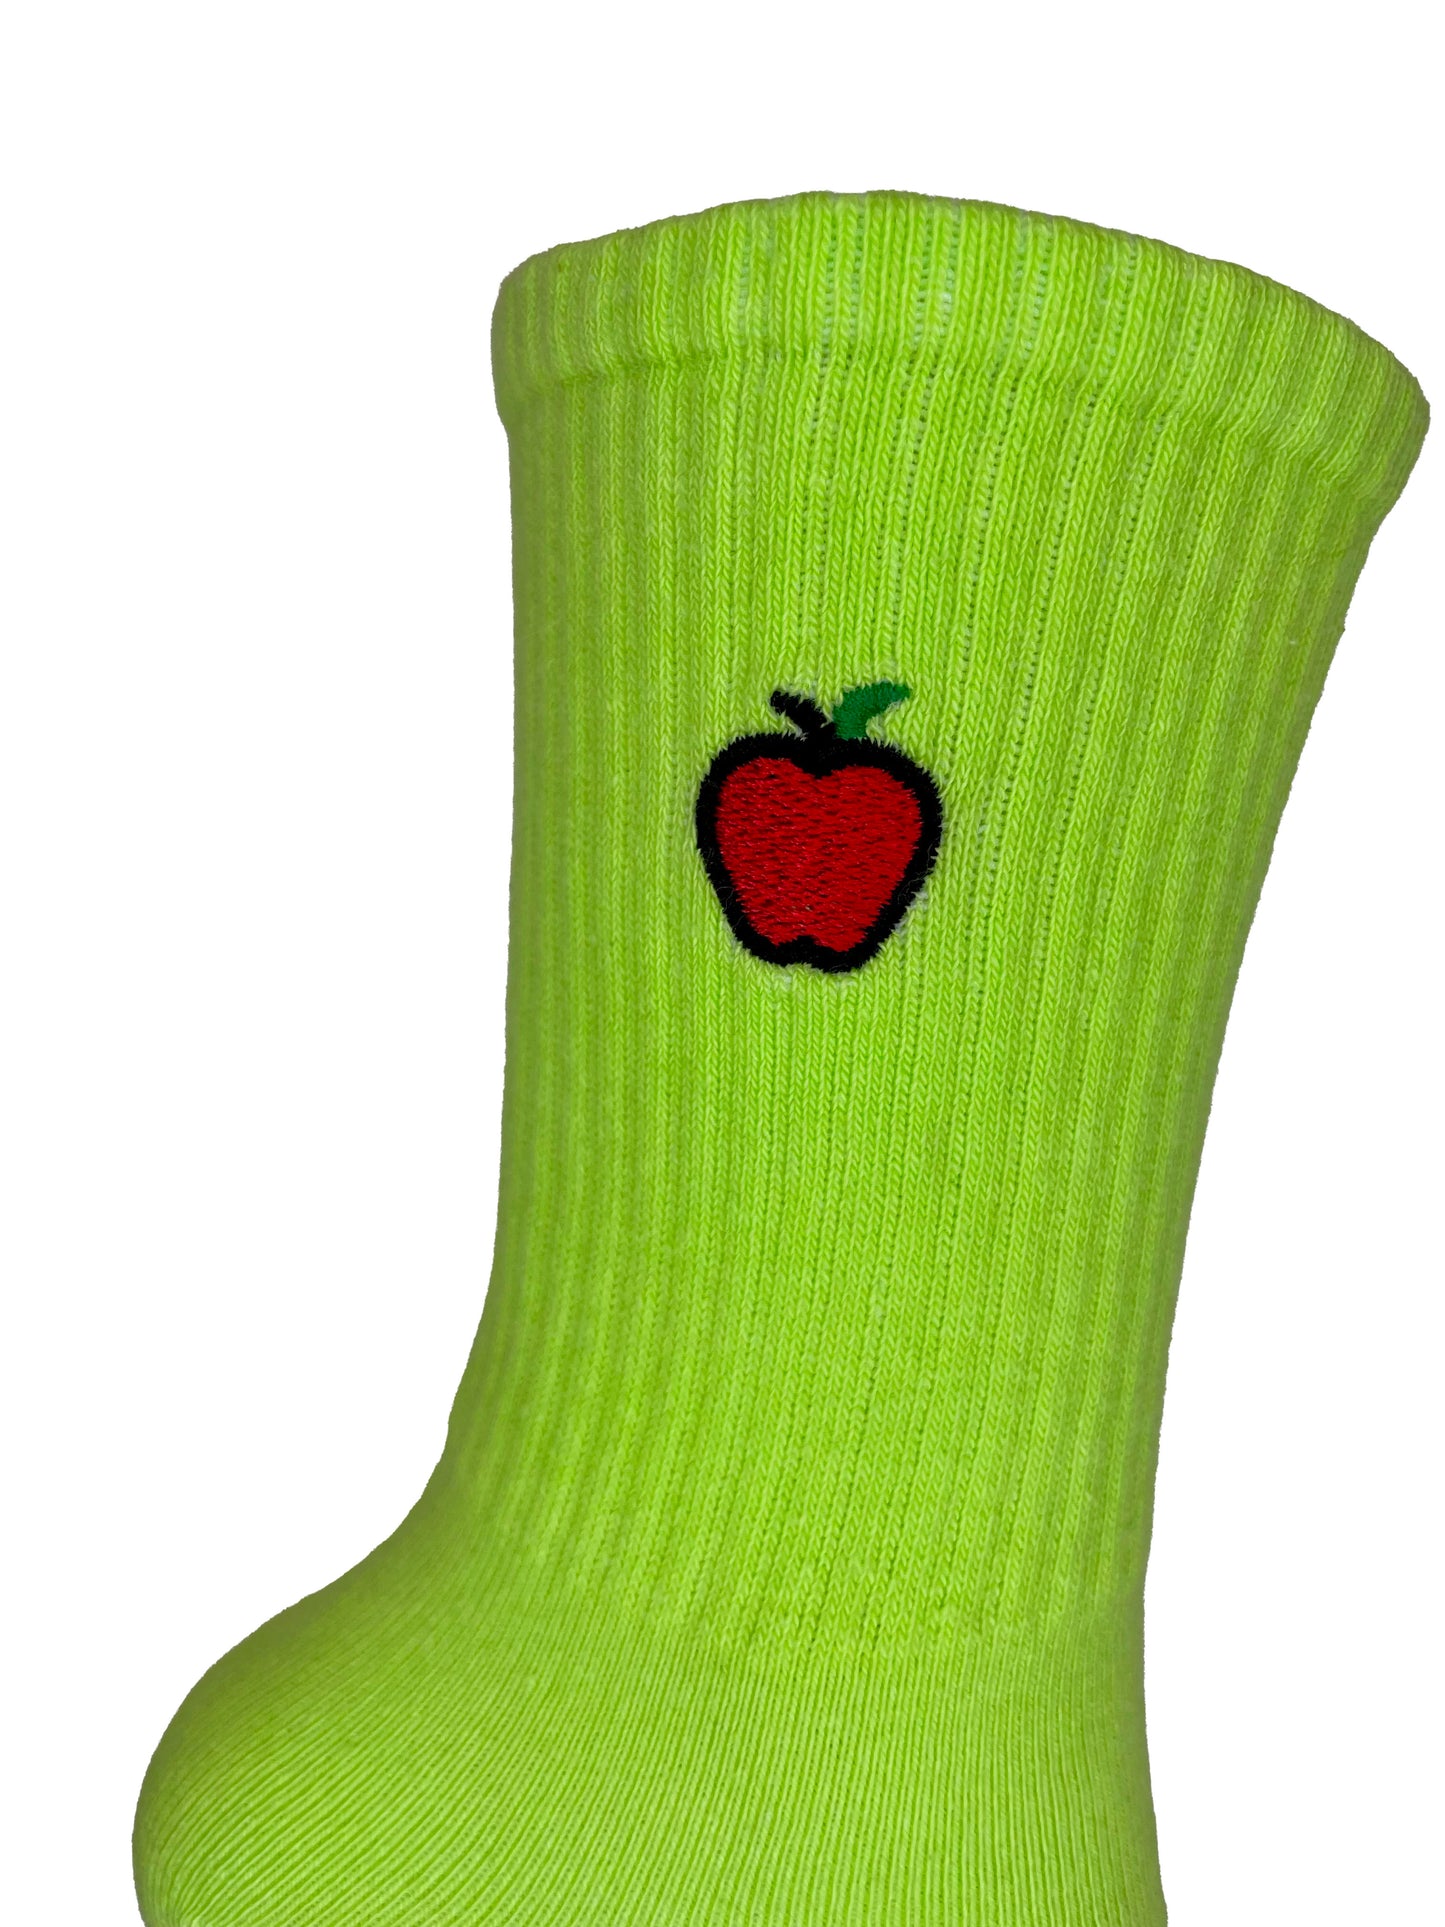 Embroidered Apple